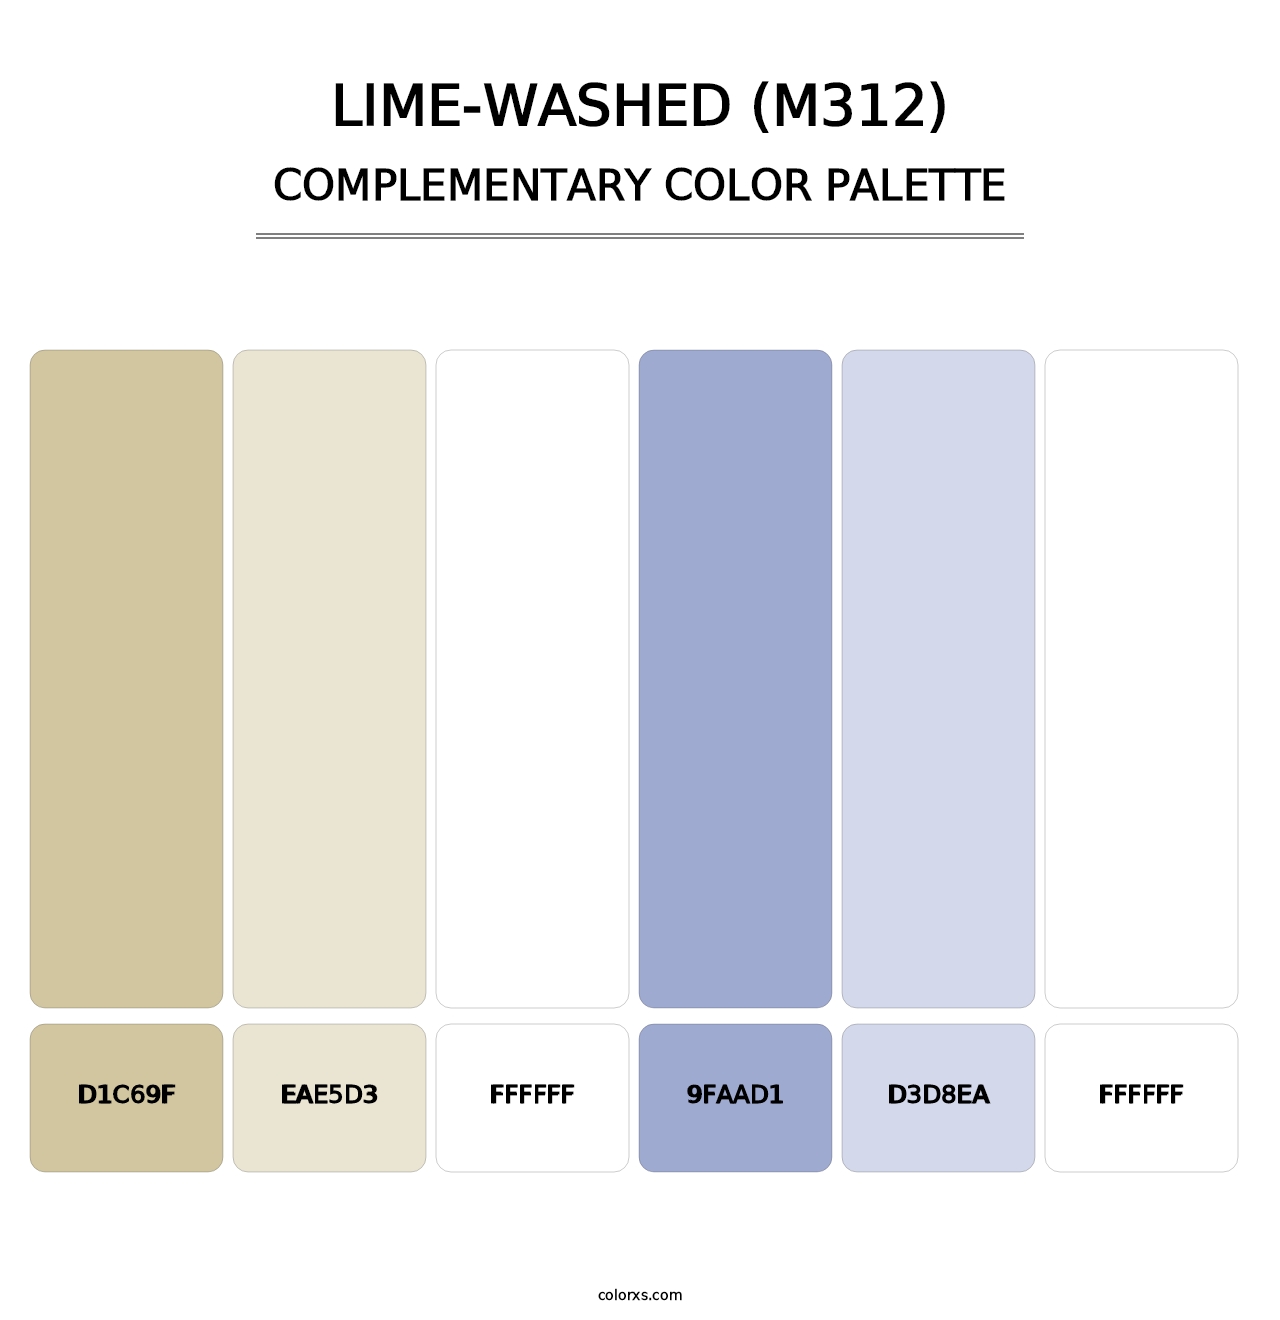 Lime-Washed (M312) - Complementary Color Palette